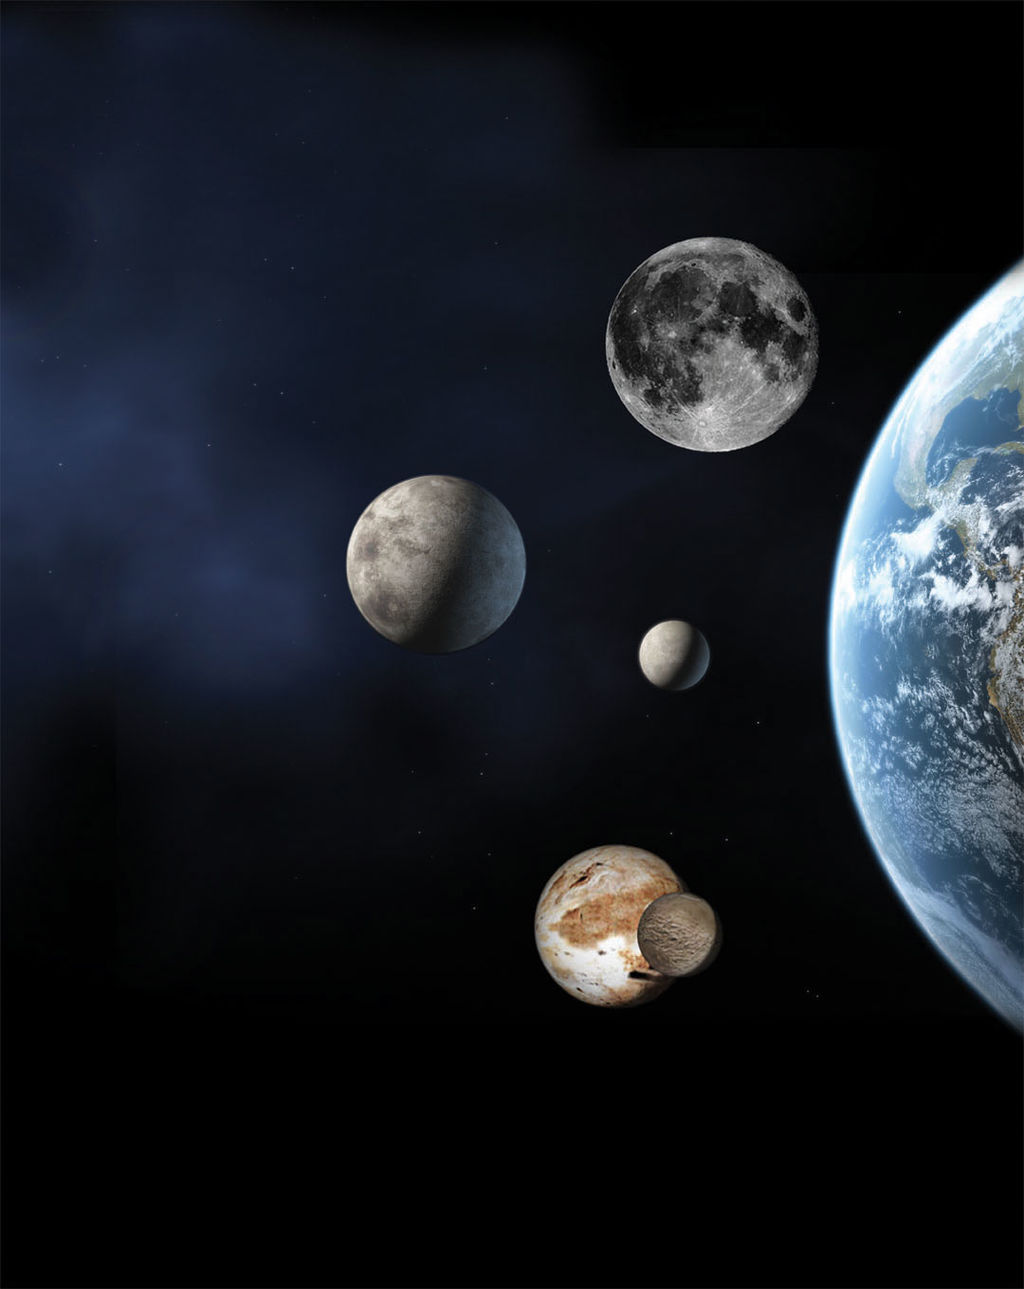 An artist's concept showing the size of the best known dwarf planets compared to Earth and its moon (top). Eris is left center; Ceres is the small body to its right and Pluto and its moon Charon are at the bottom.